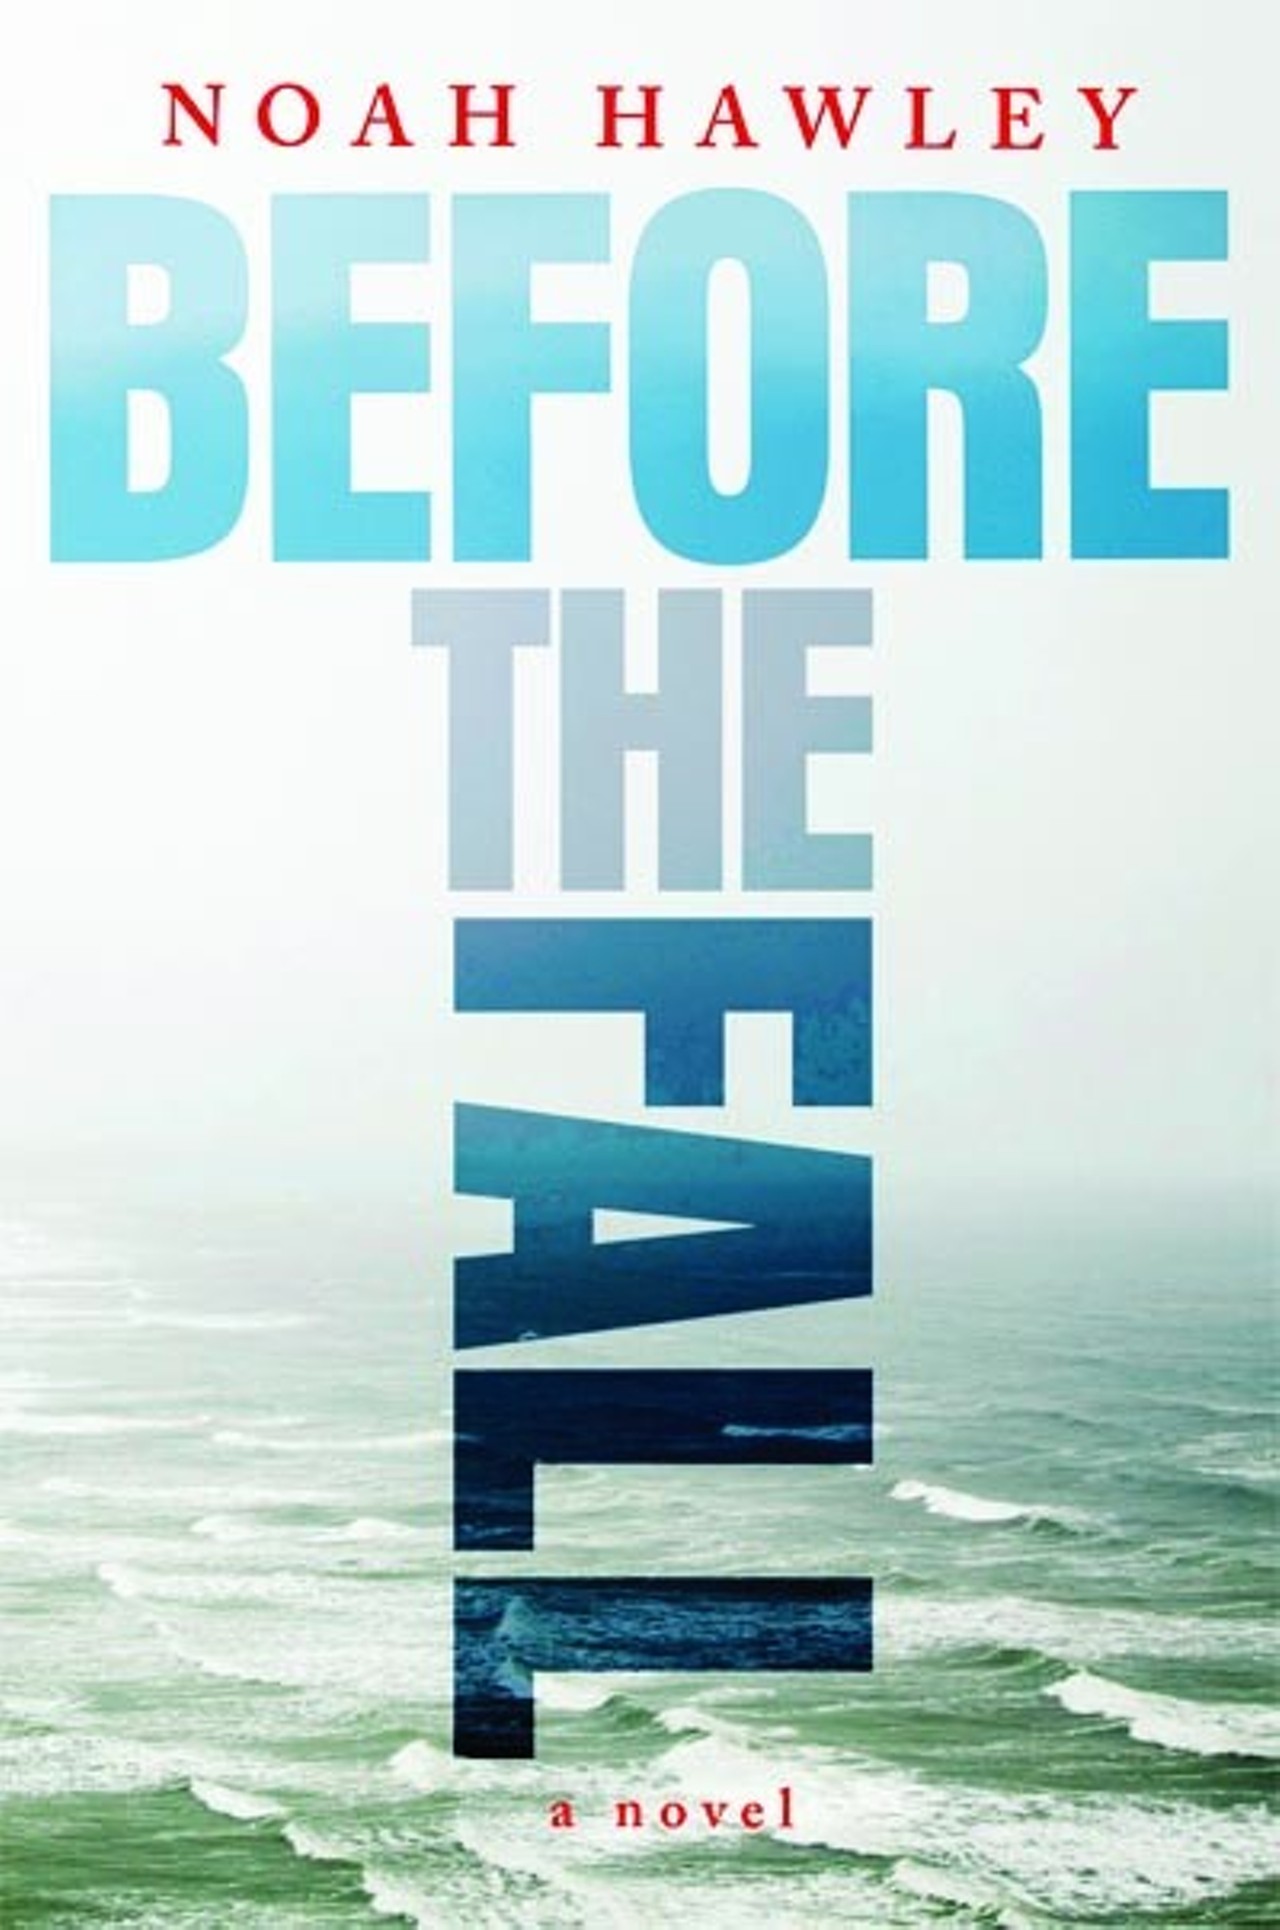 Before The Fall by Noah Hawley -
Hawley is probably best known as the creator of the critically acclaimed television adaptation of the Coen brothers' Fargo; but his place in this year's literary scene deserves notice on its own merit. Before The Fall begins with a private jet crashing off the coast of Cape Cod. The novel then alternates between the aftermath of the crash and the lives of the well-to-do passengers aboard before the tragedy. The jet itself belongs to a media bigwig in charge of a Fox News-like network, which allows Hawley to widen the scope to examine how media covers breaking news and tragedies. That's partially accomplished through a Bill O'Reilly-esque character who's trying to get to the bottom of what happened to his friend and boss. In an era of fake news and incessant spin, Before the Fall is a timely exploration of our turbulent times.